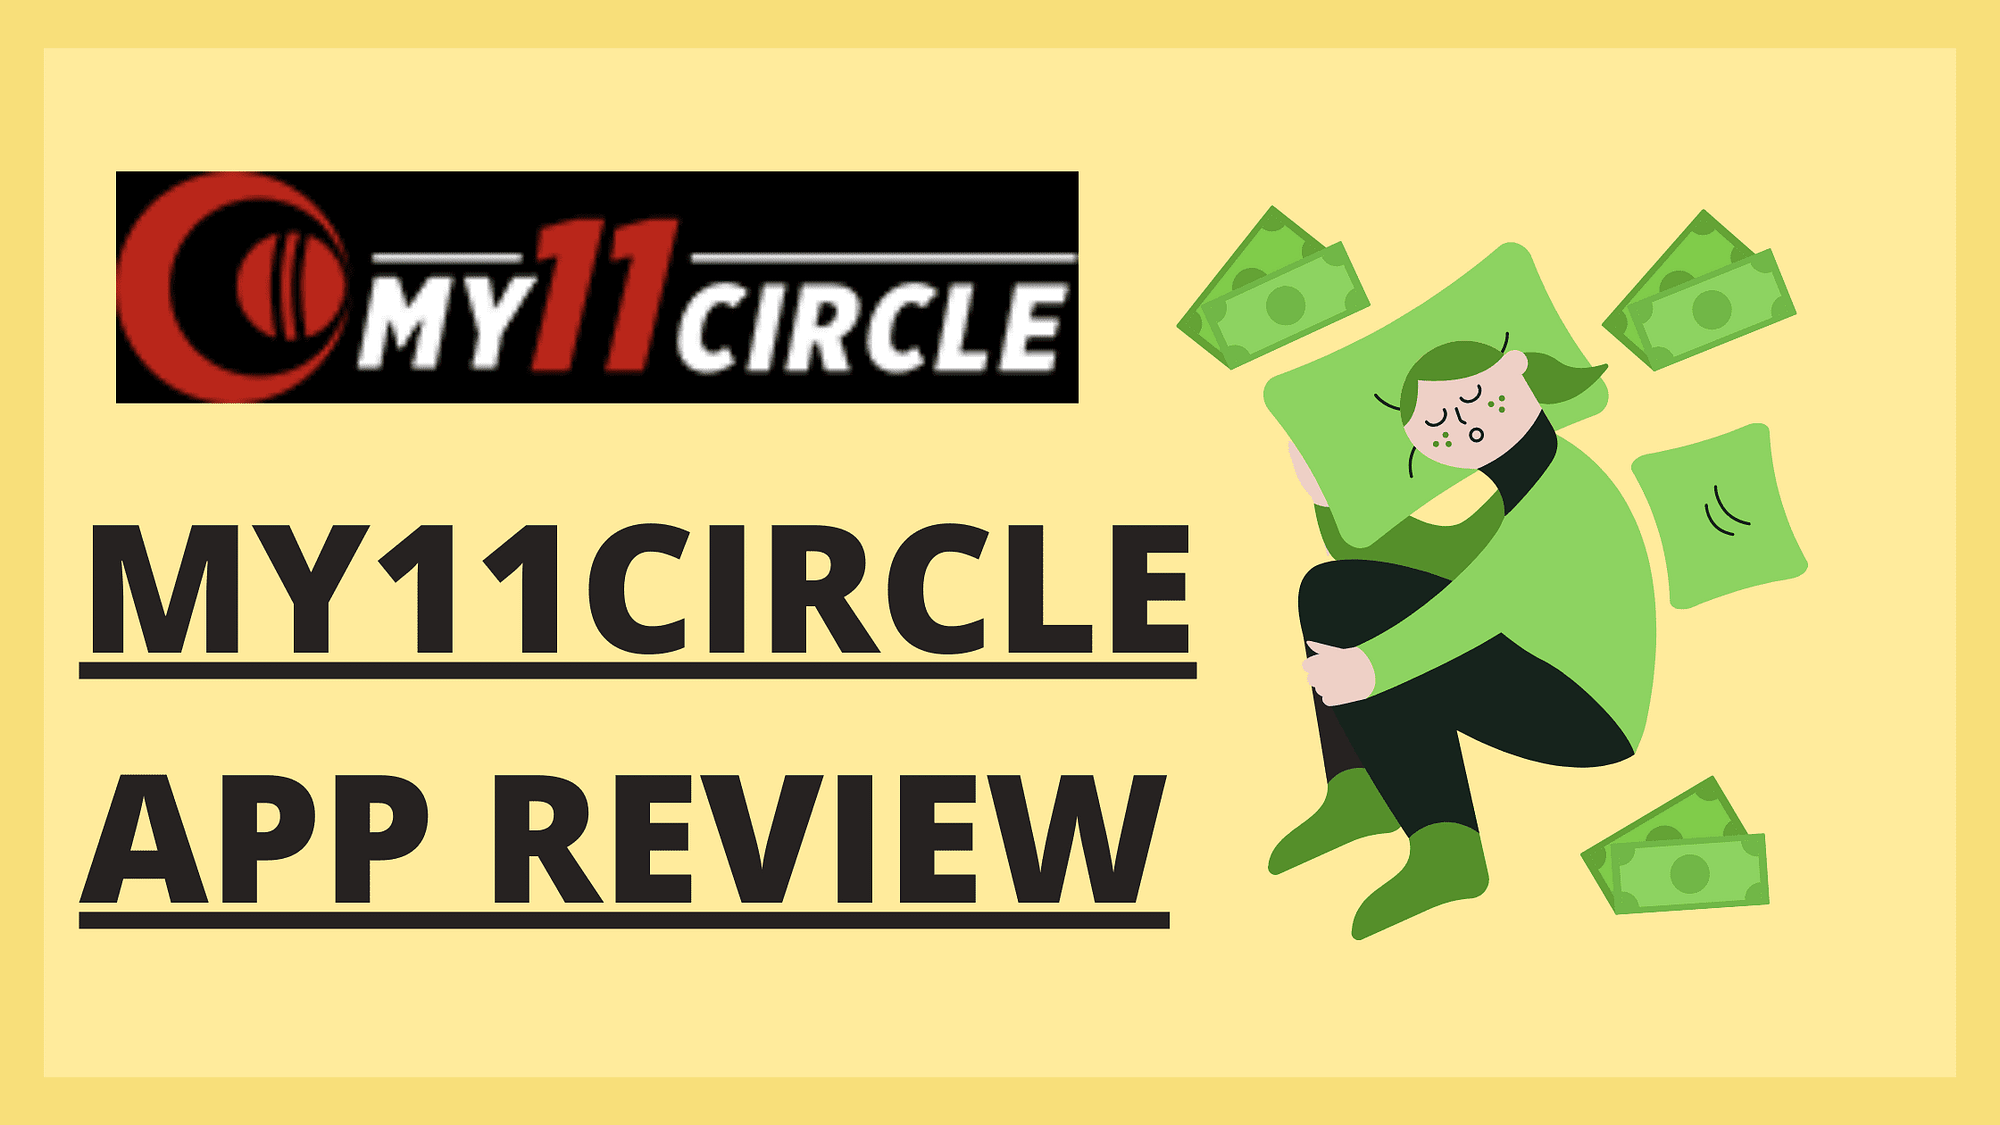 Read more about the article My11circle app review ! How to Download My11circle app